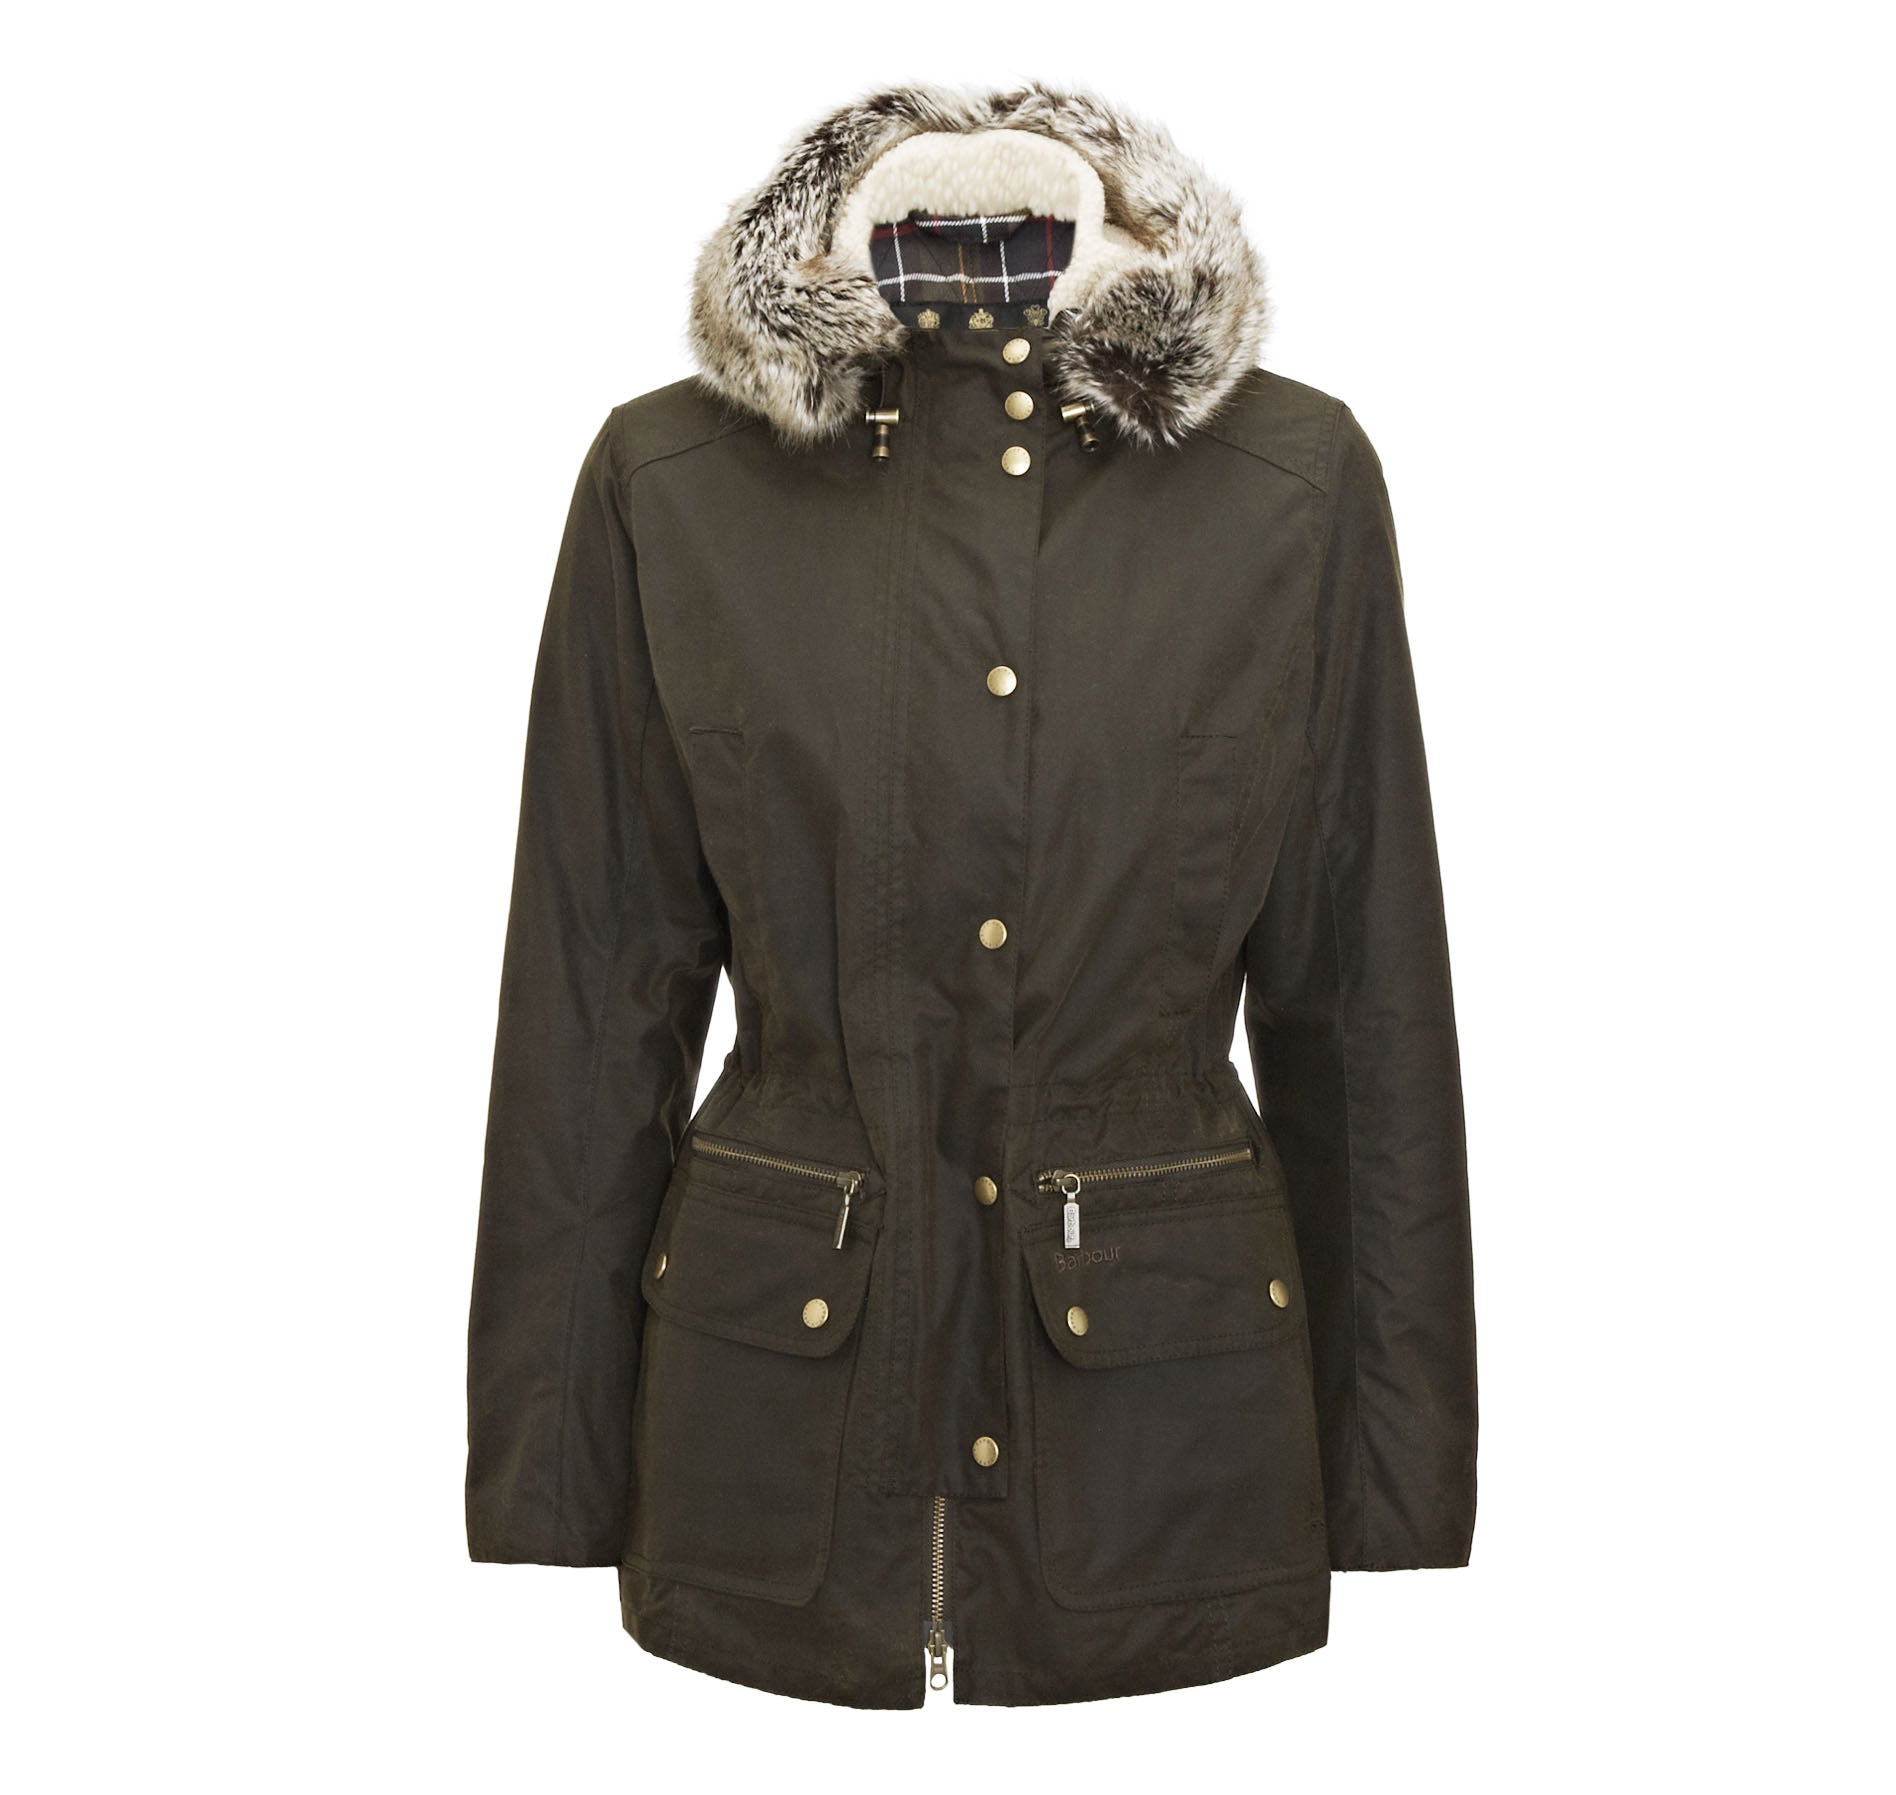 Barbour Kelsall Waxed Jacket for Ladies 